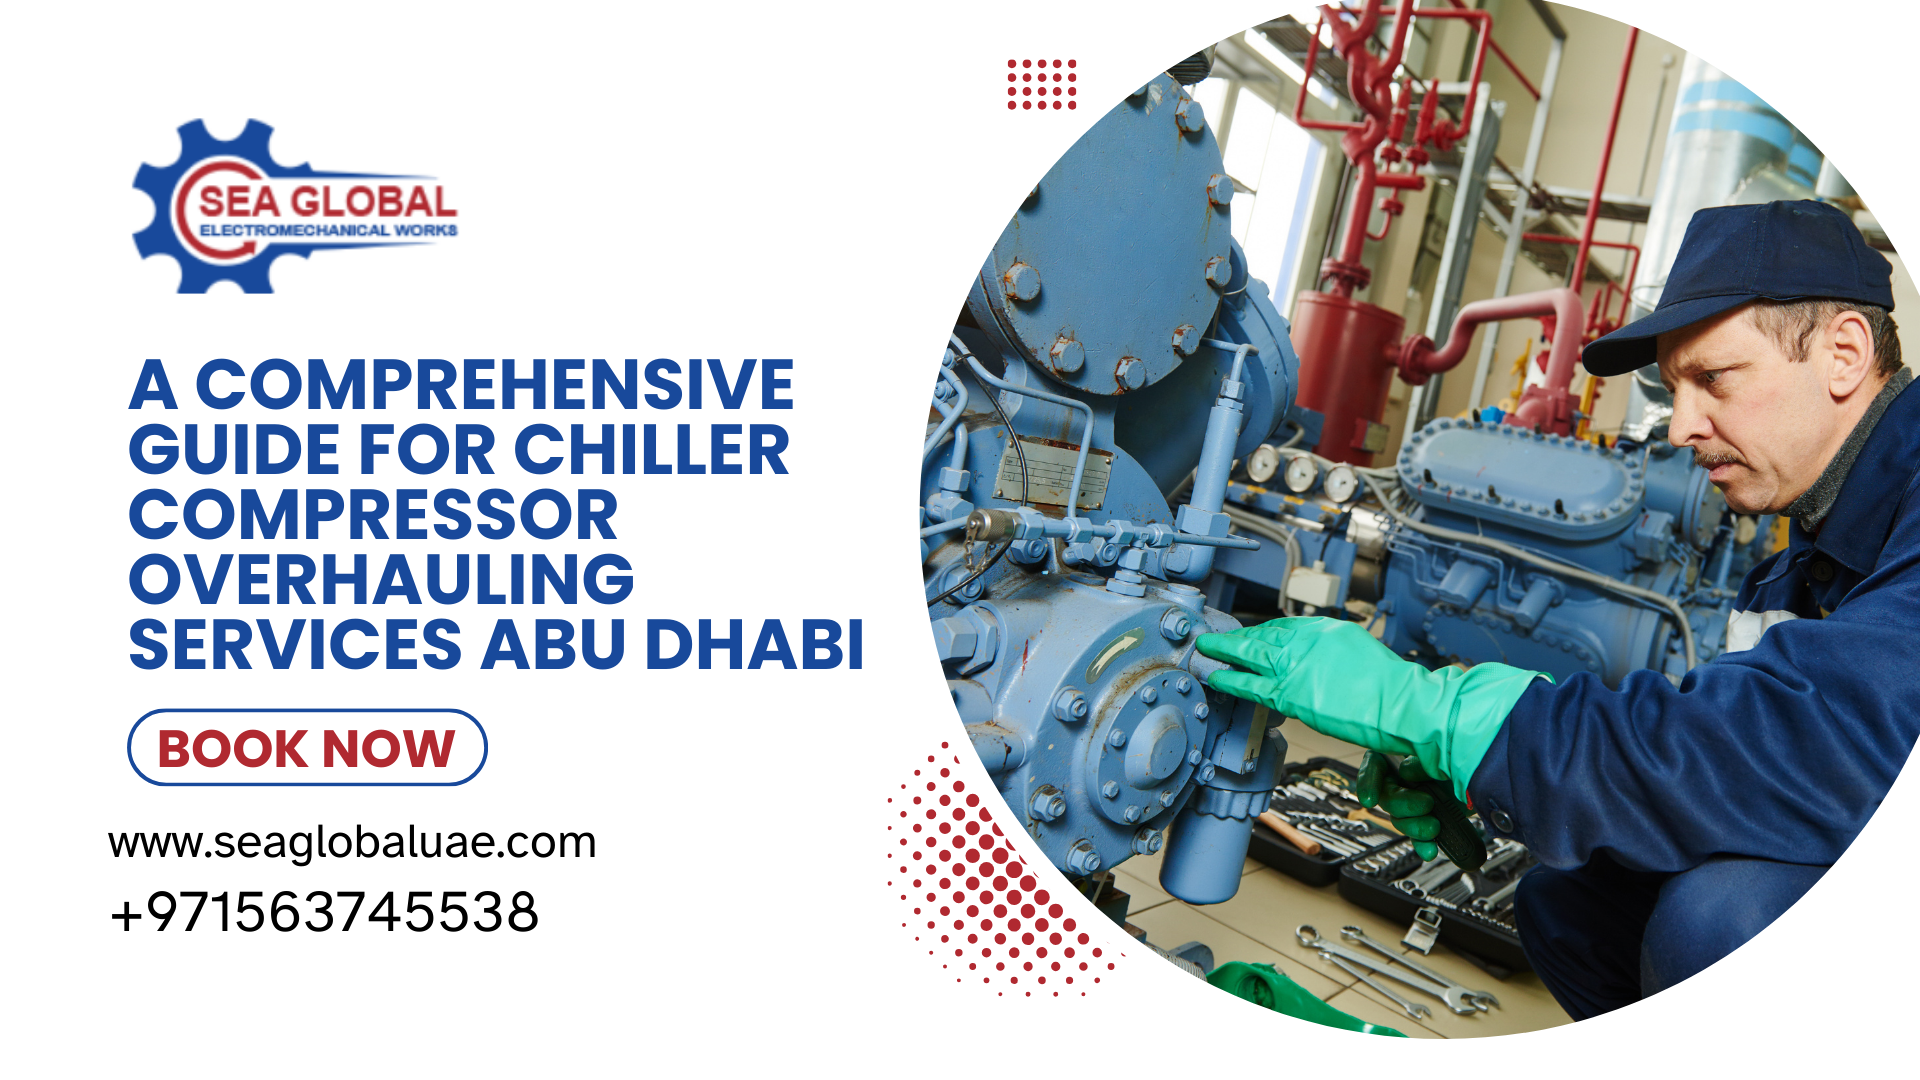 A Comprehensive Guide for Chiller Compressor Overhauling Services Abu Dhabi